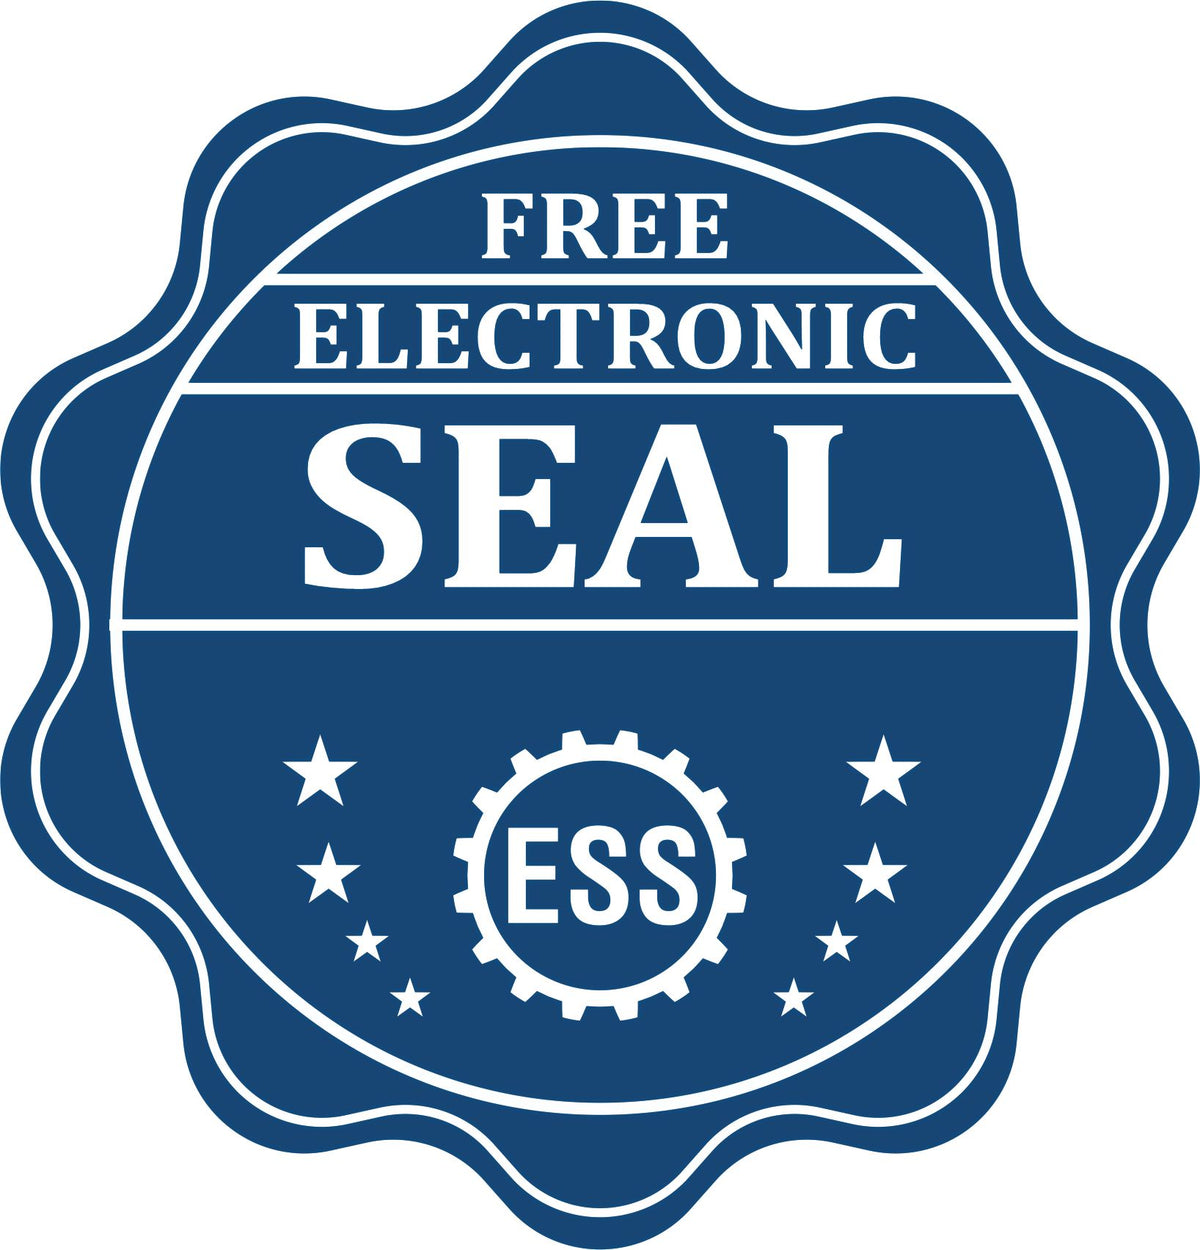 A badge showing a free electronic seal for the Slim Pre-Inked South Dakota Architect Seal Stamp with stars and the ESS gear on the emblem.